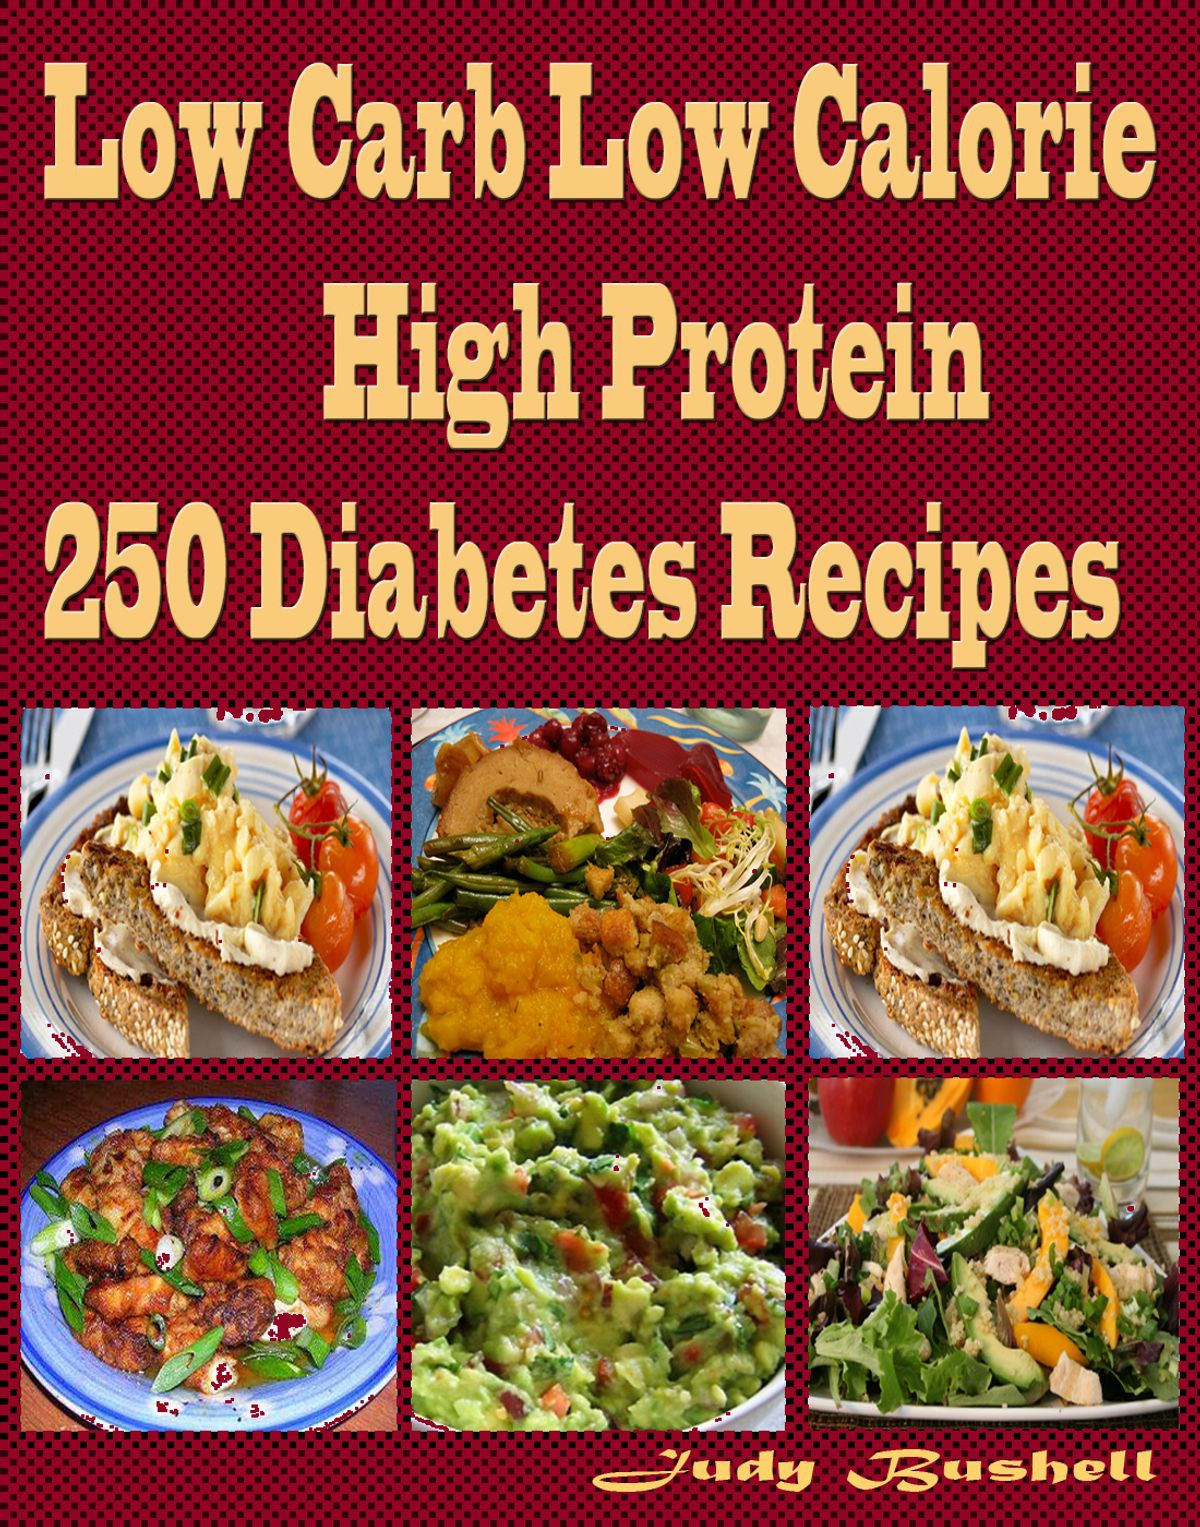 Low Carb Low Calorie Recipes Food Network Awesome Low Carb Low Calorie High Protein 250 Diabetes Recipes